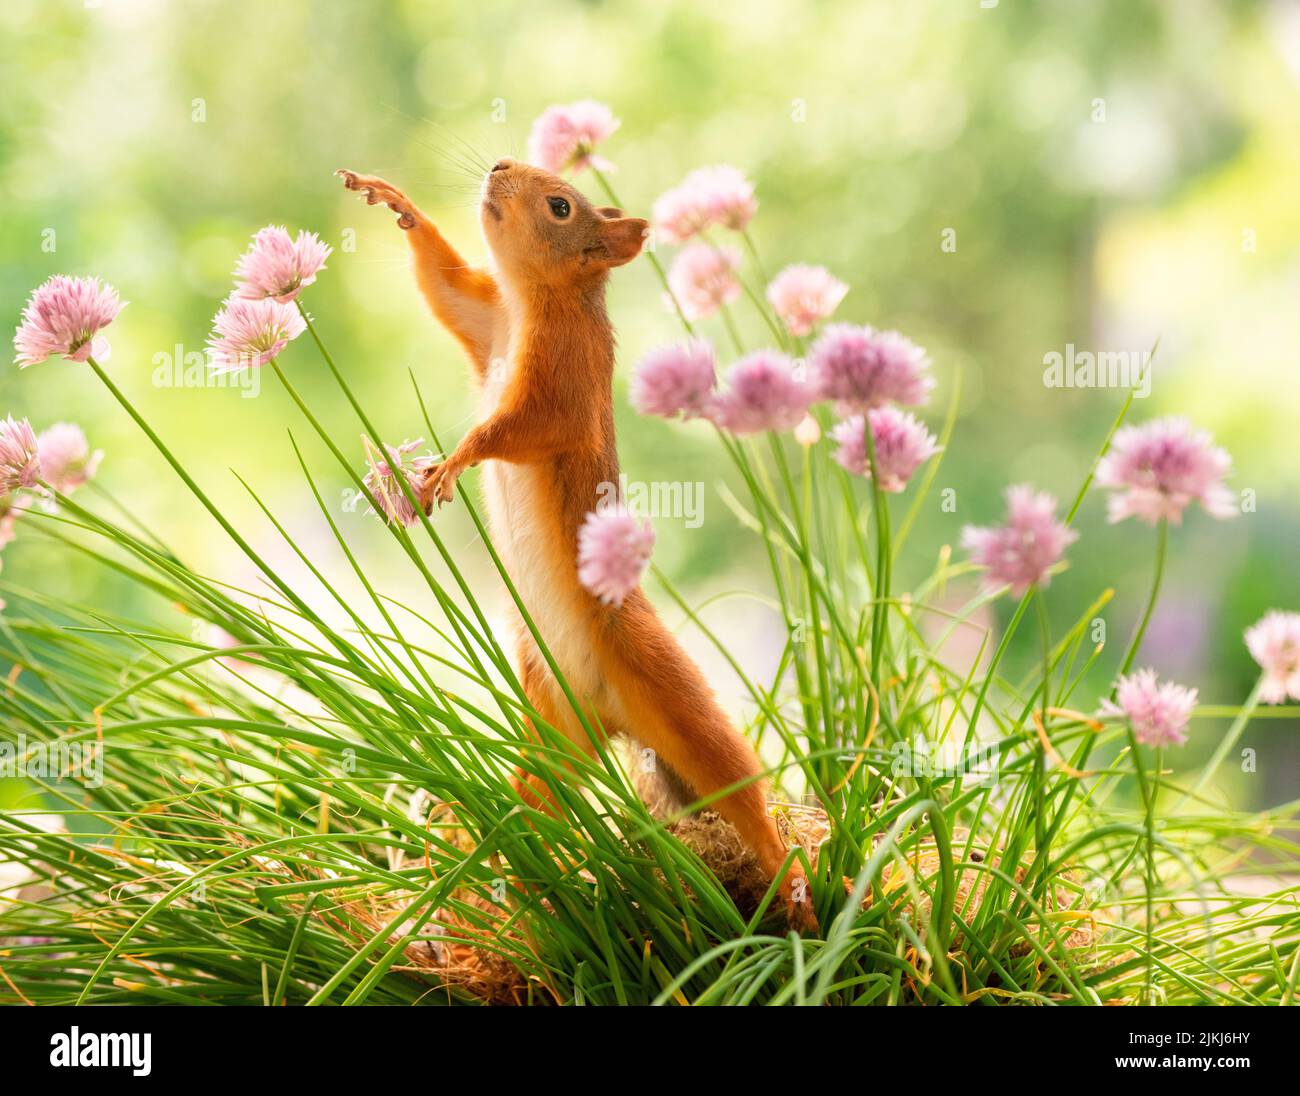 Red Squirrel stand between chives flowers Stock Photo